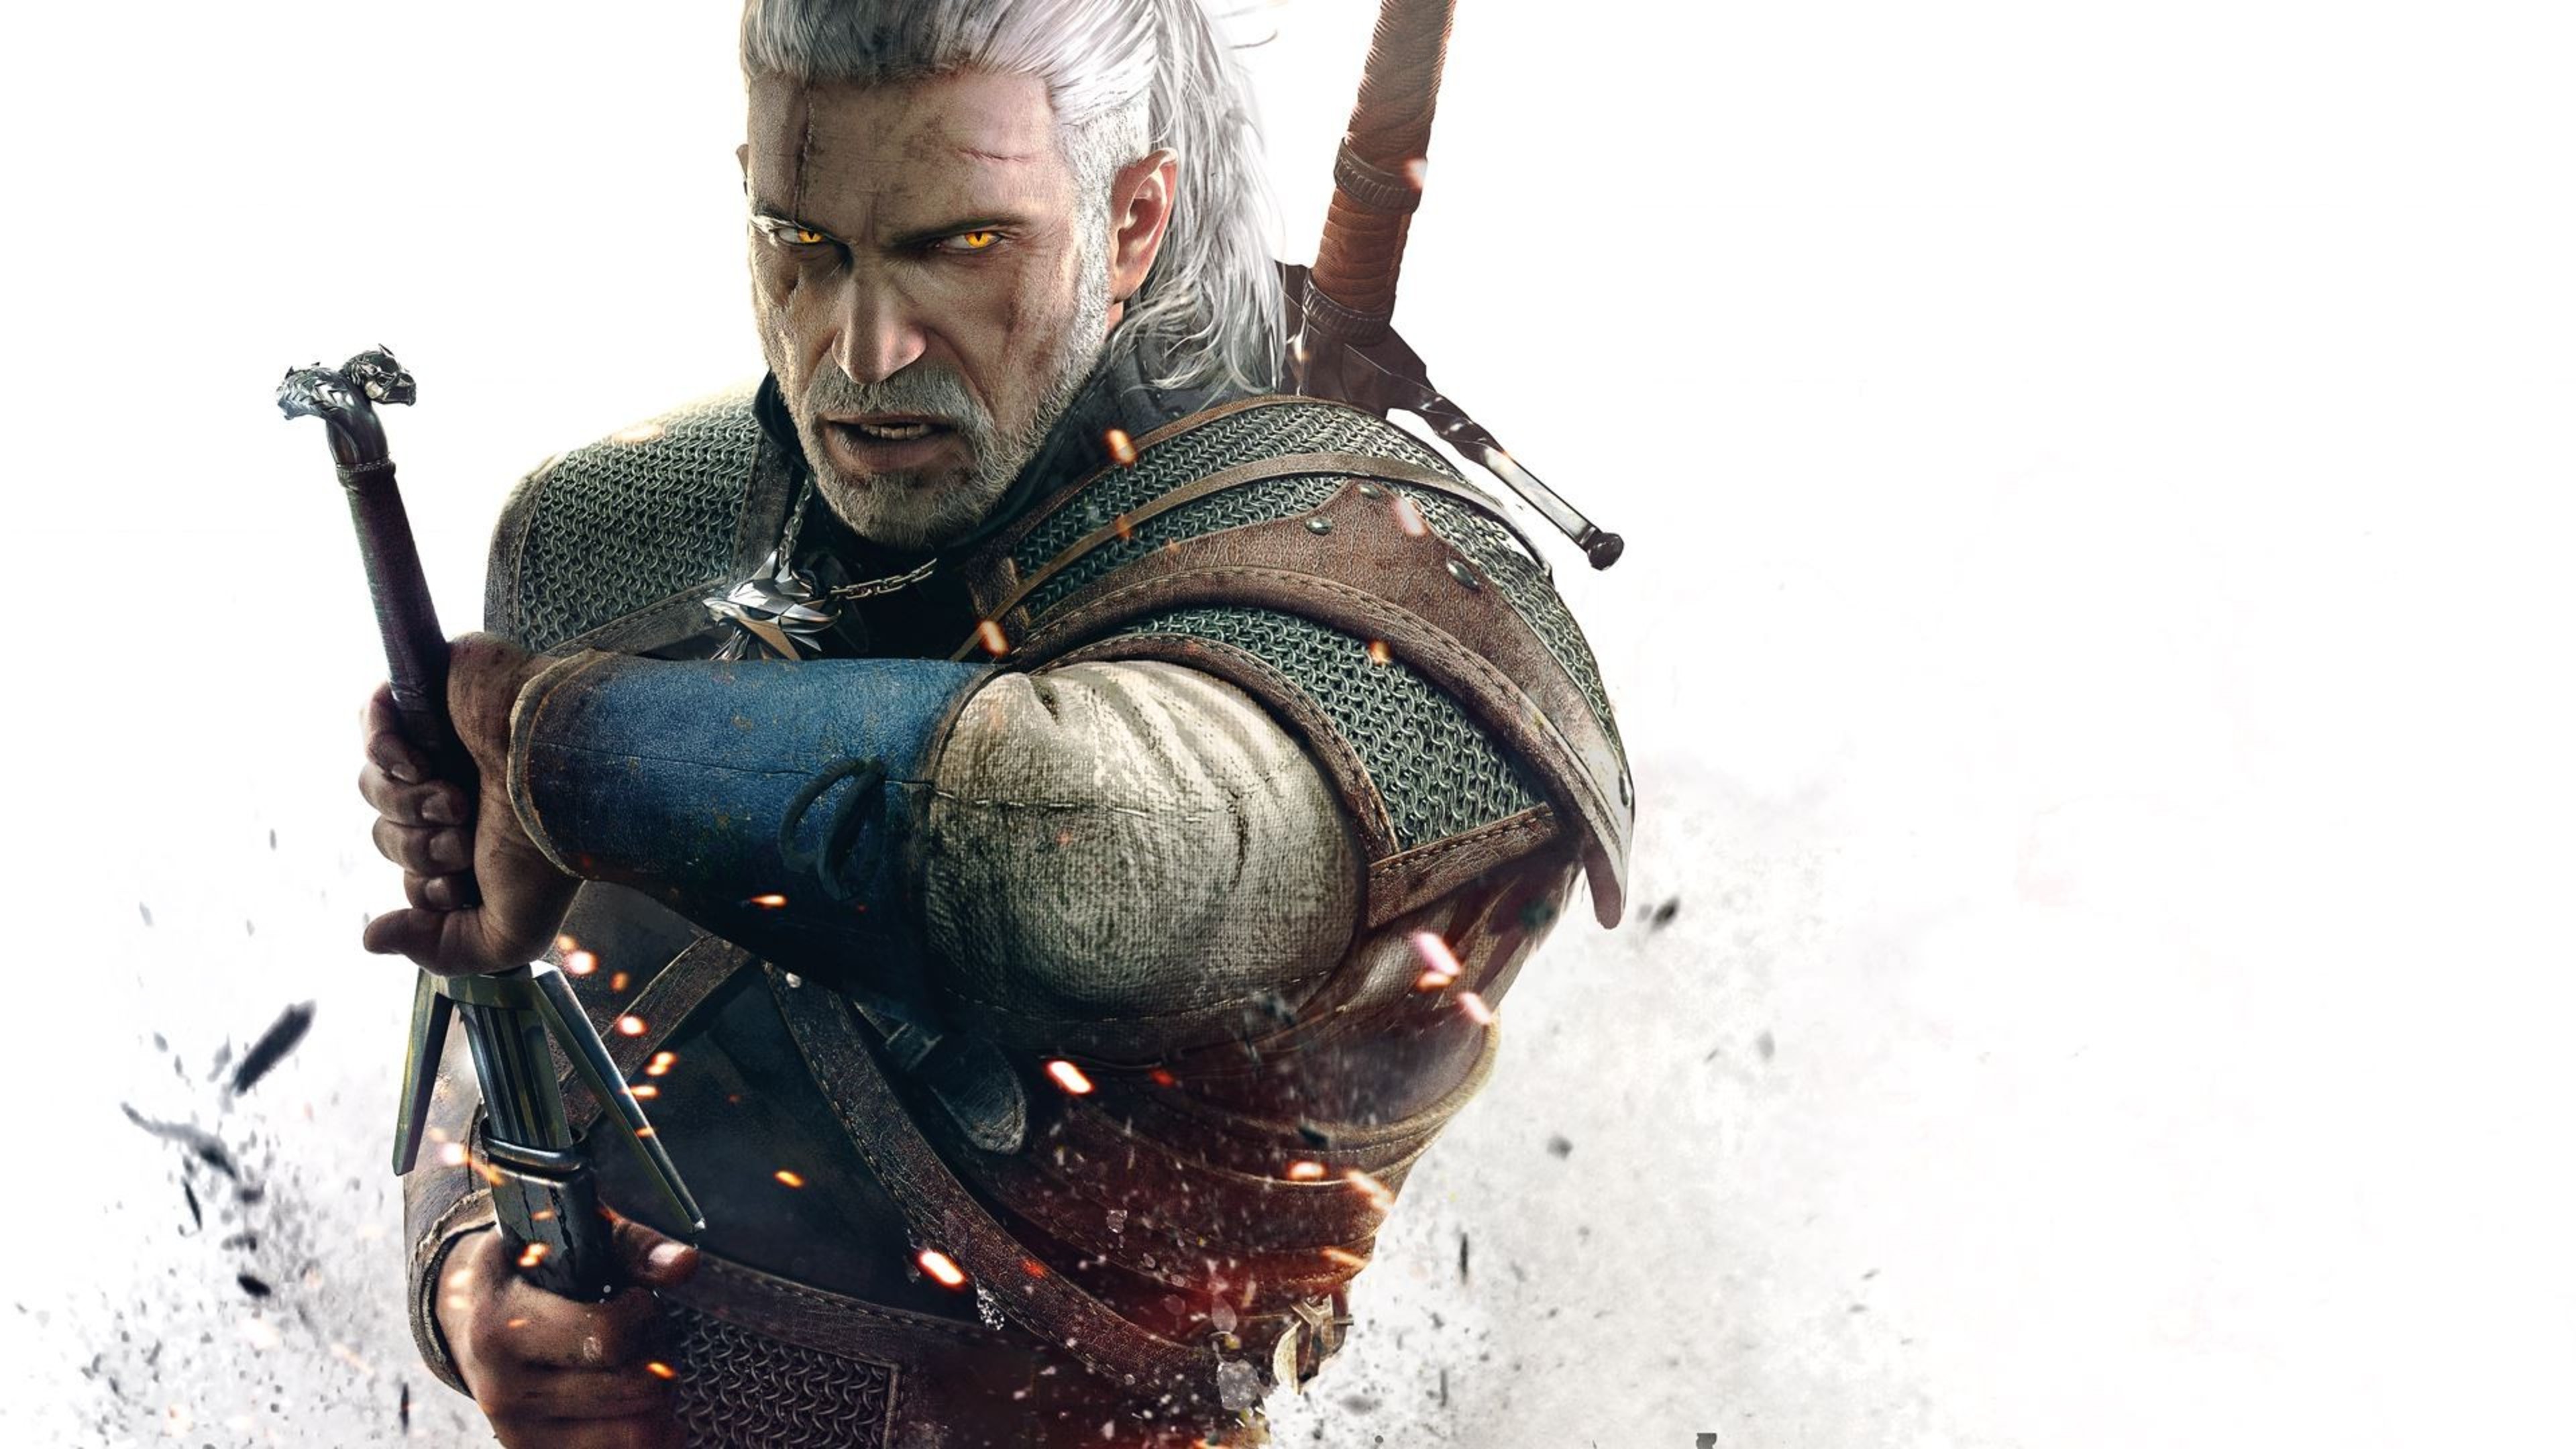 the witcher 3 wallpaper 4k,action film,soldier,movie,viking,games